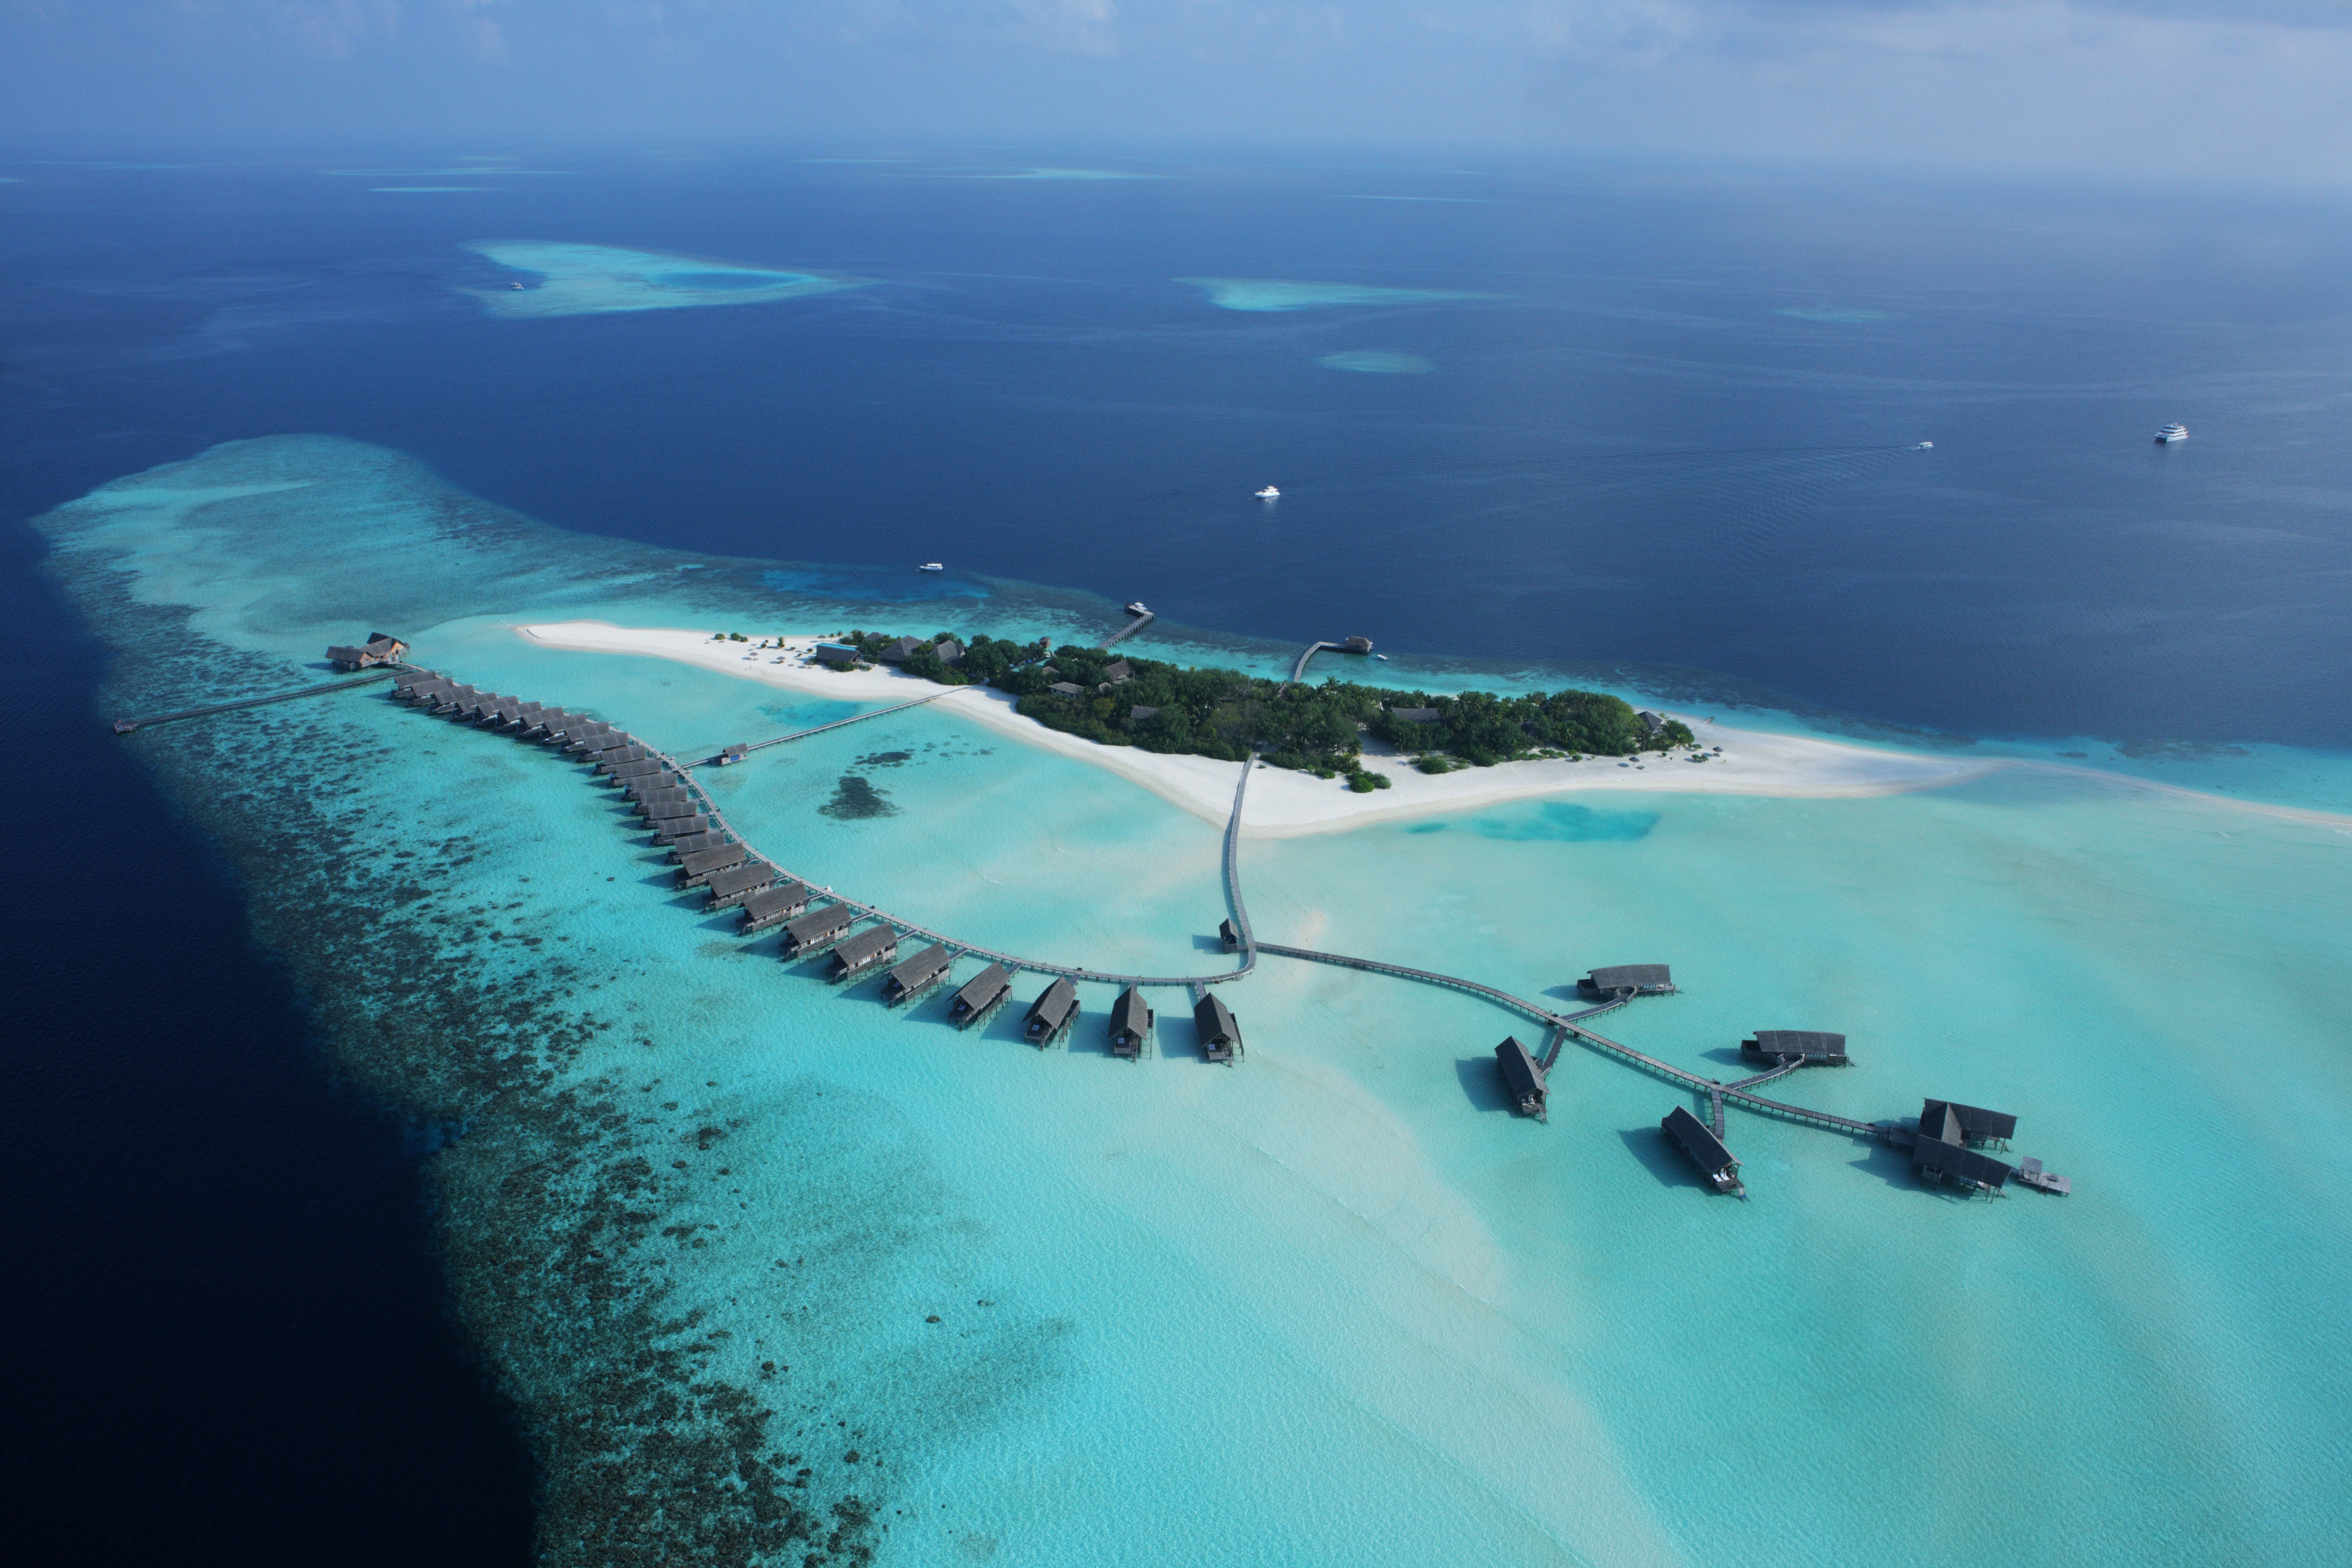 Make the Maldives your luxury getaway this winter | South China Morning Post